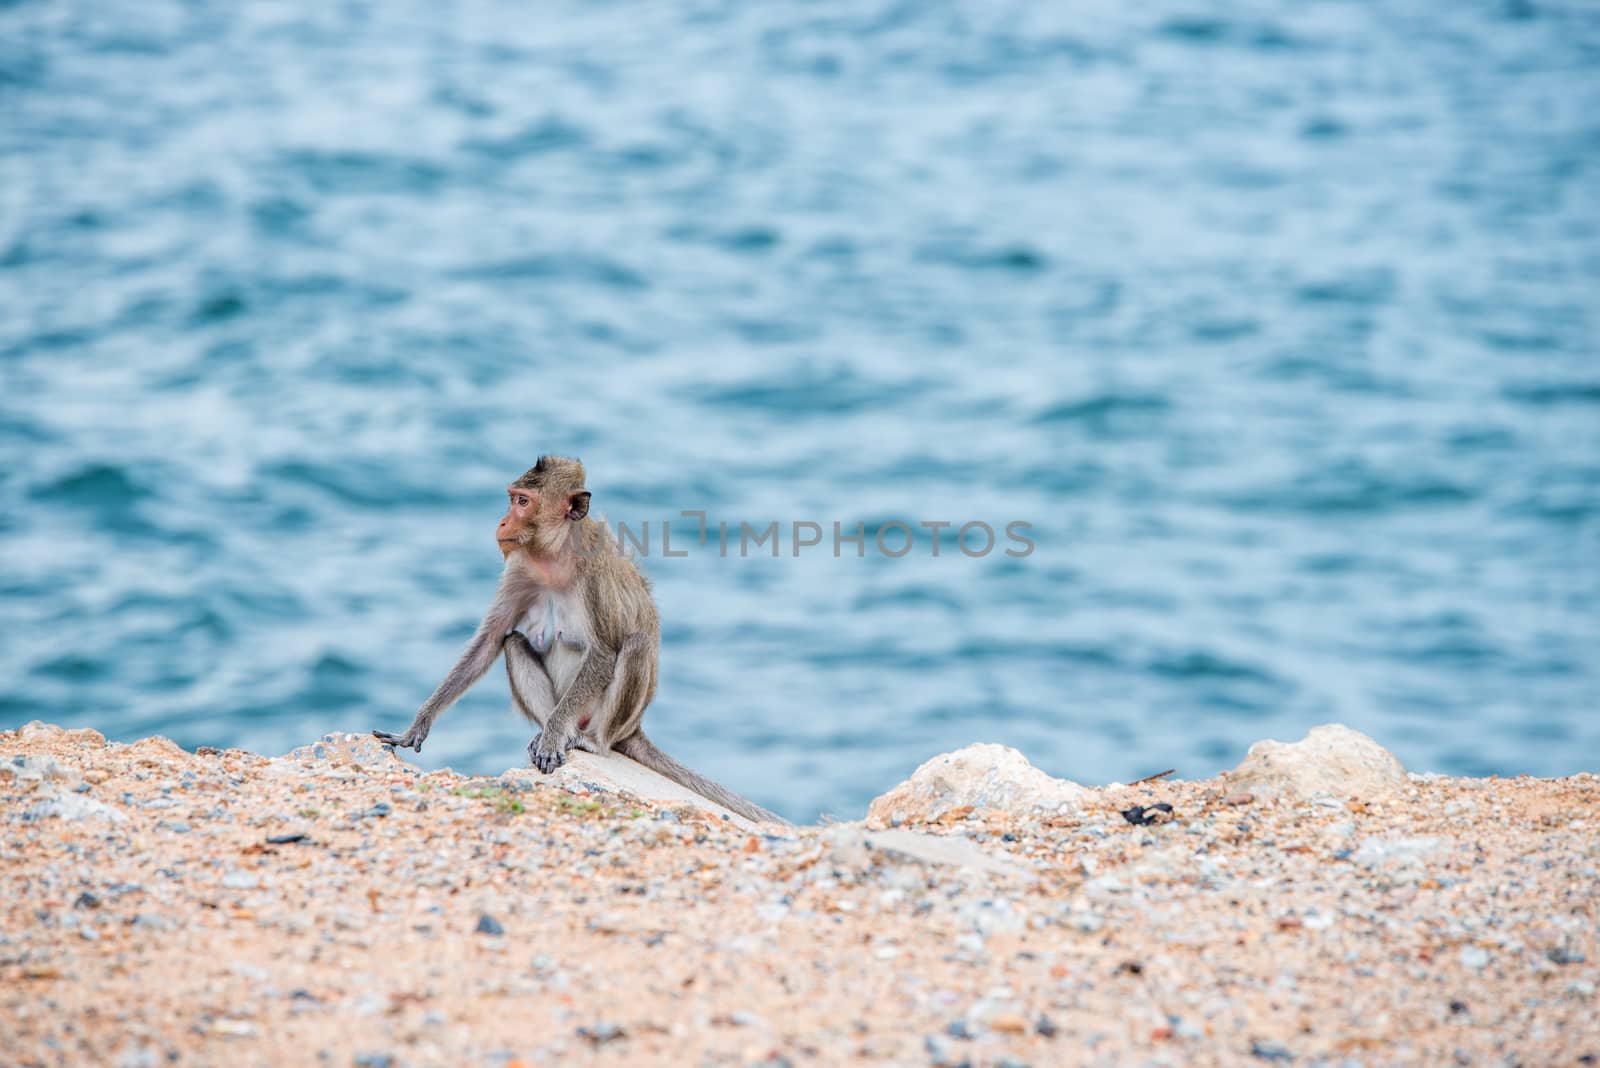 mother monkey sitting on the sand with sea background by antpkr